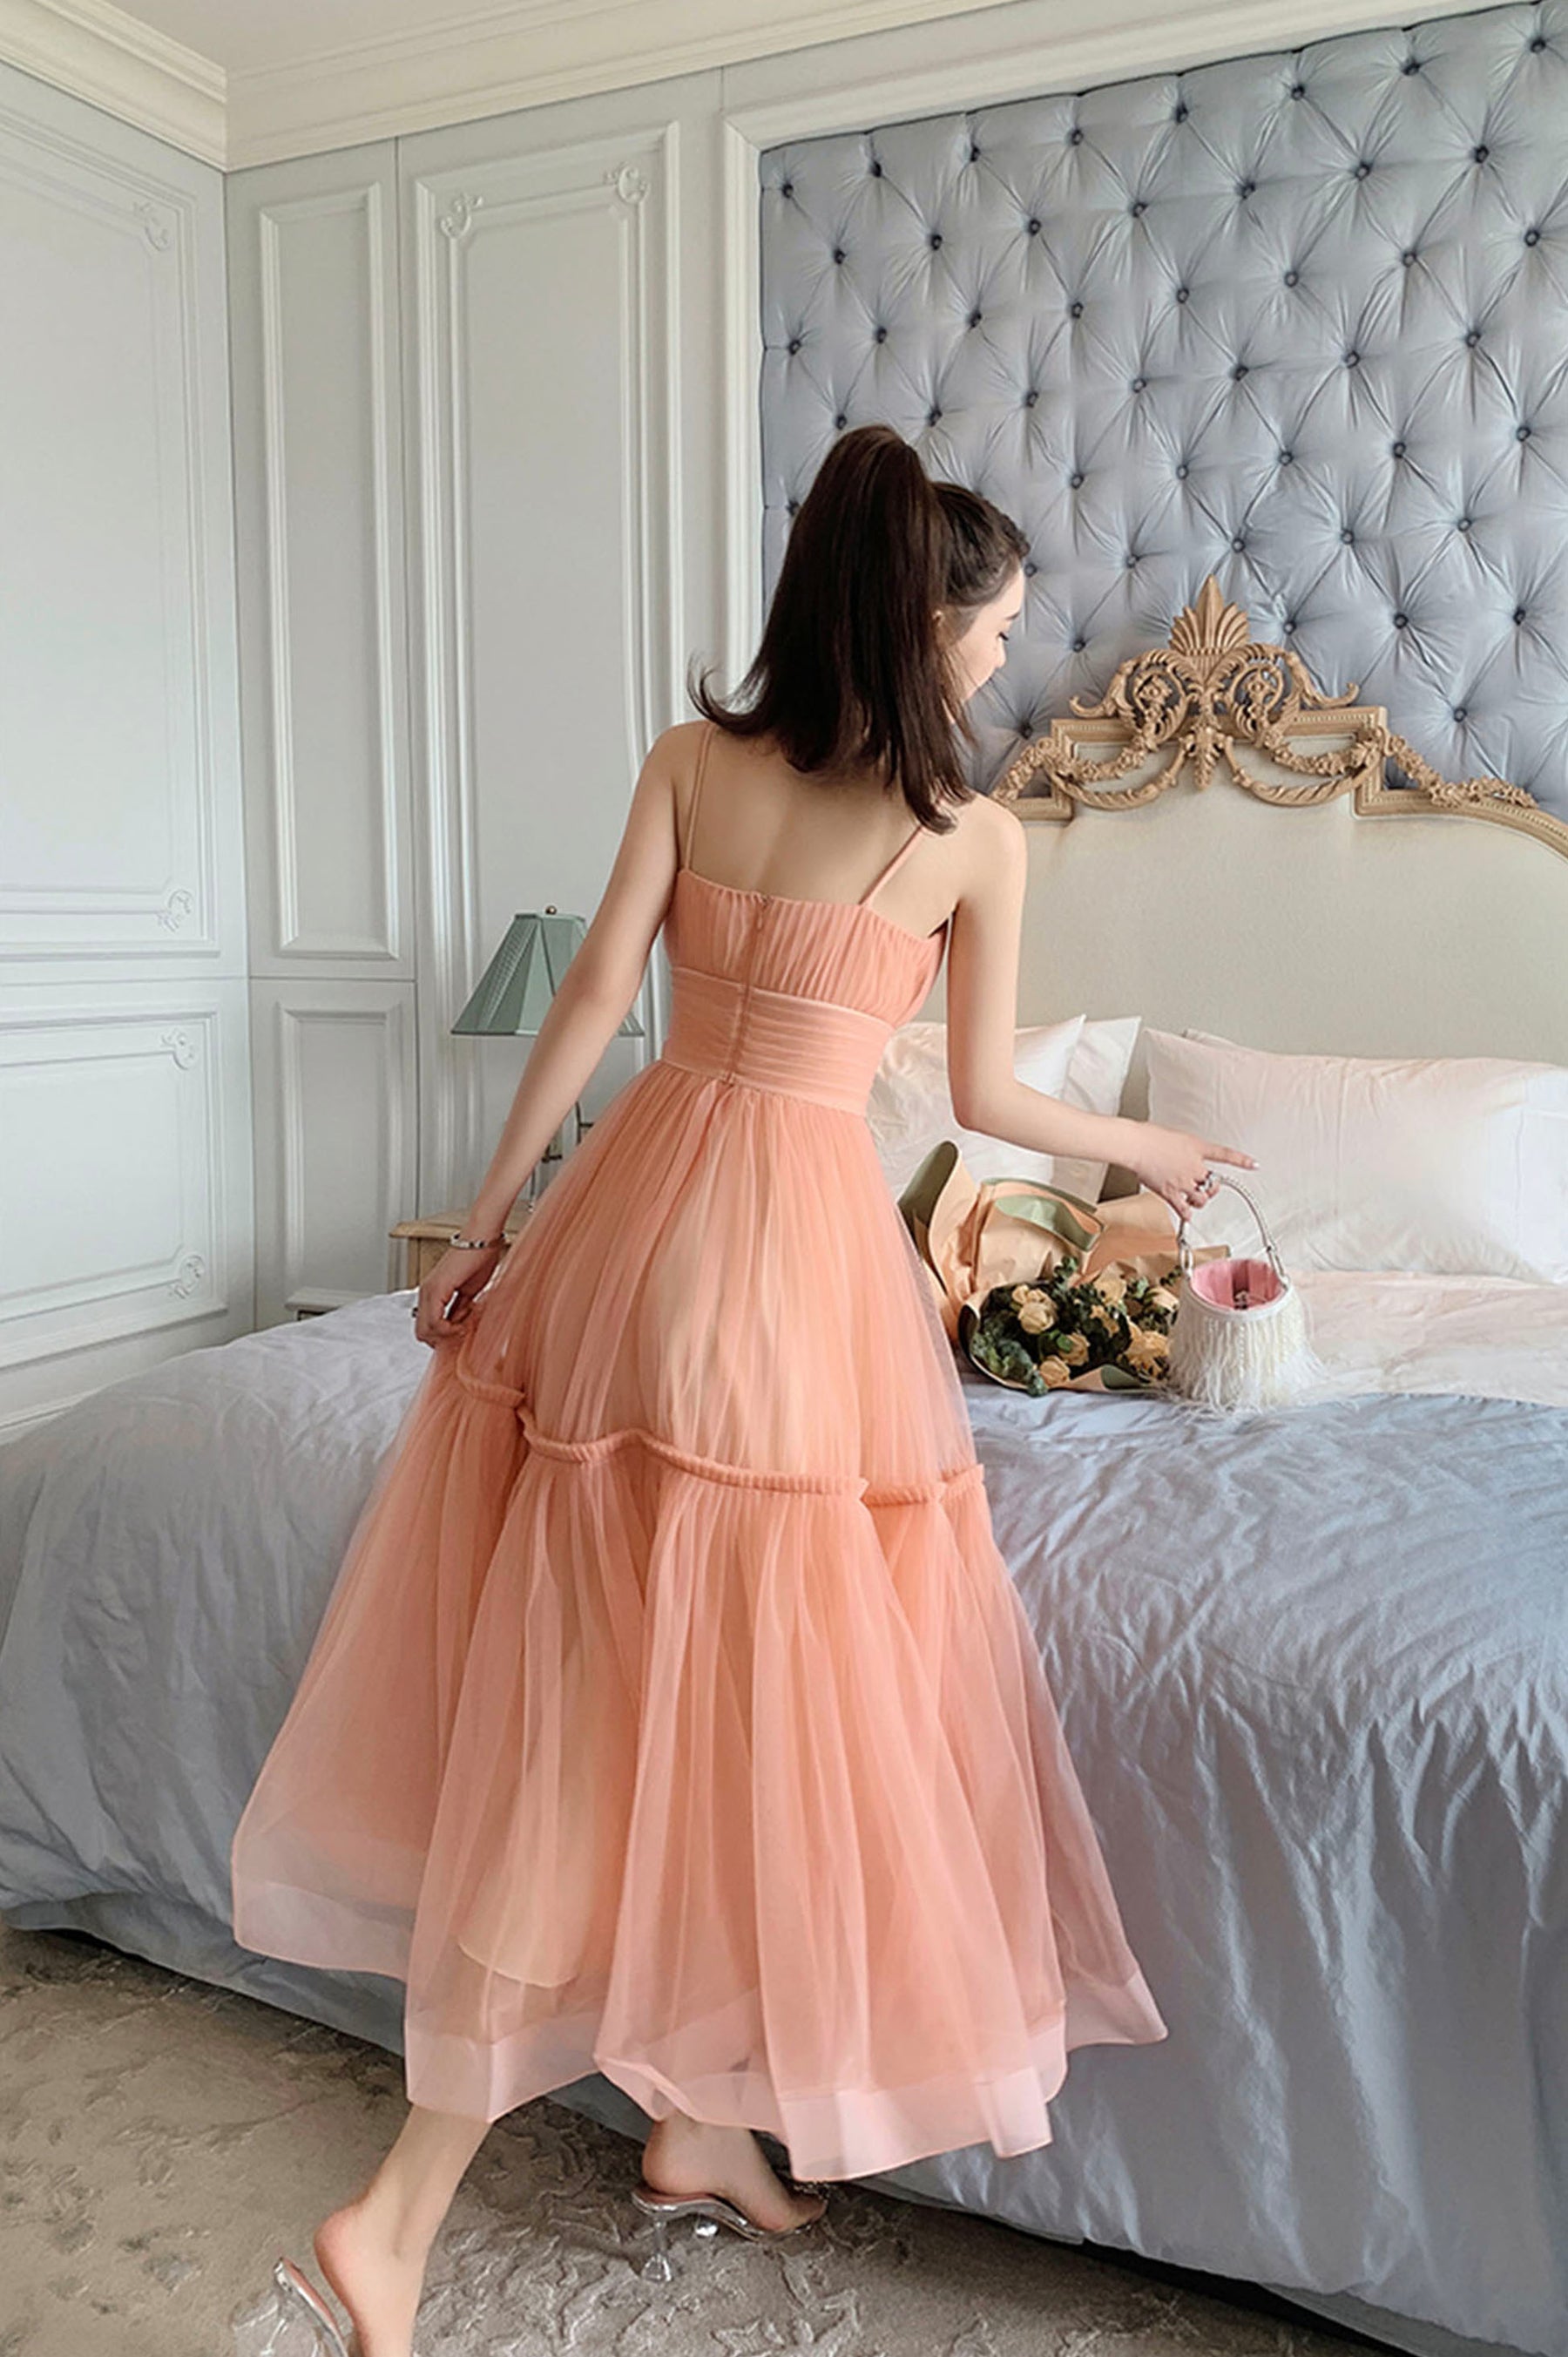 Pink Tulle Short A-Line Prom Dress, Lovely Spaghetti Straps Homecoming Party Dress US 14 / Picture Color